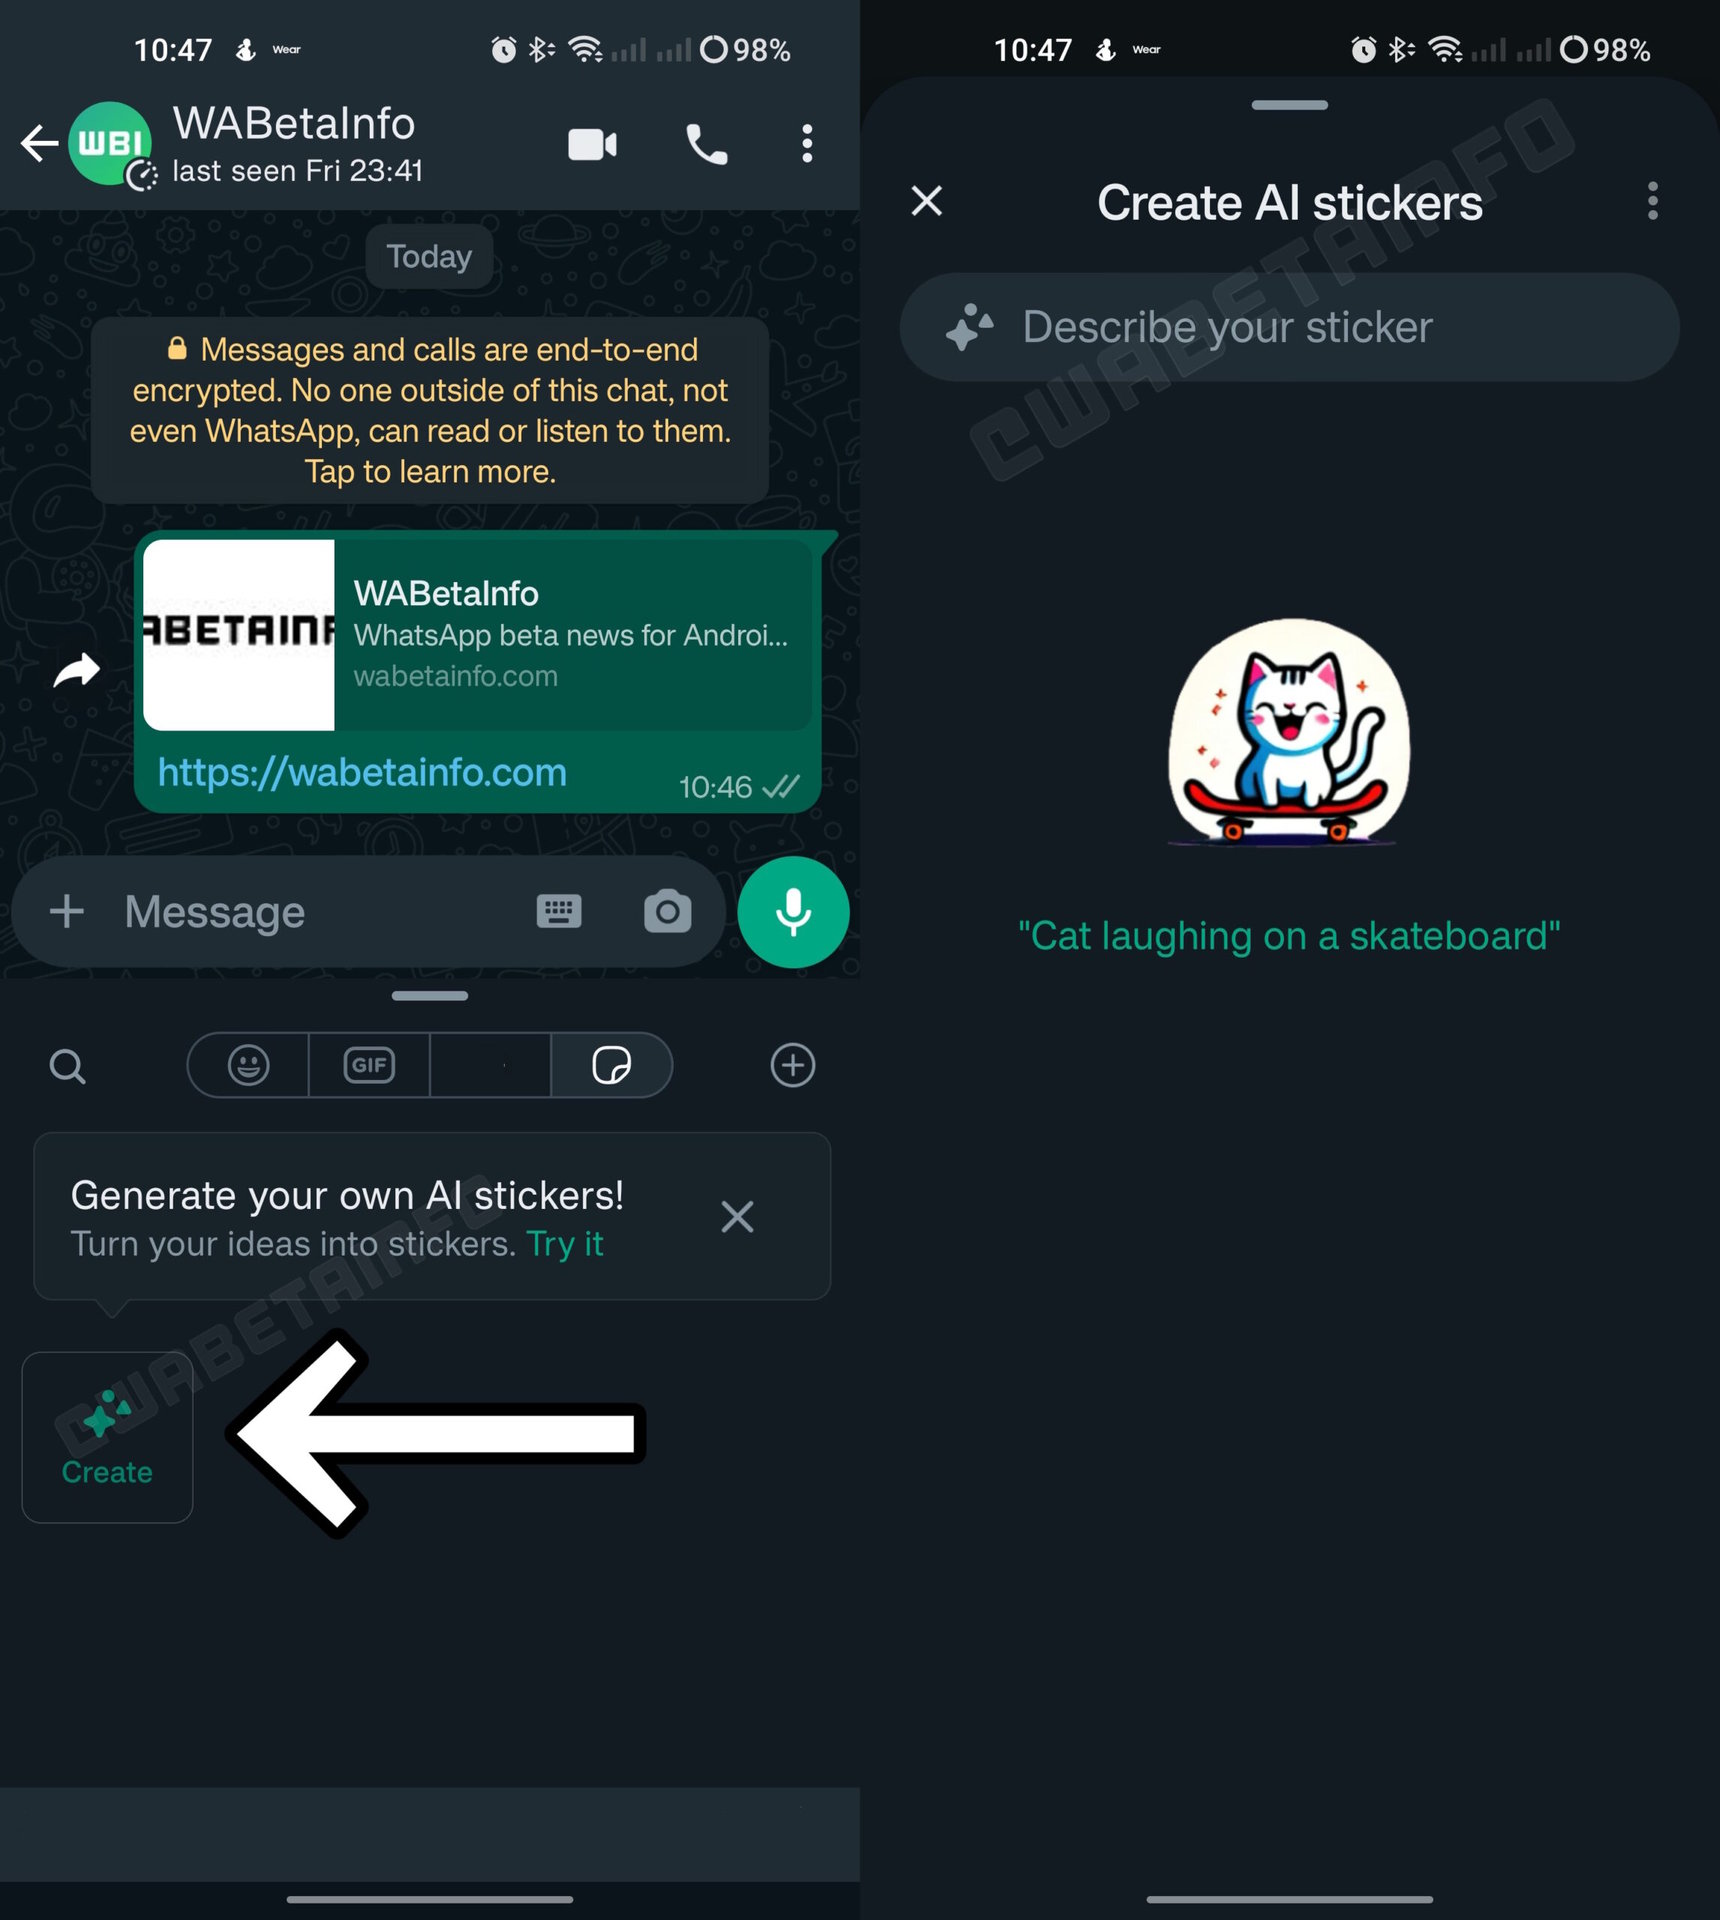 Whatsapp AI STICKER GENERATION FEATURE ANDROID